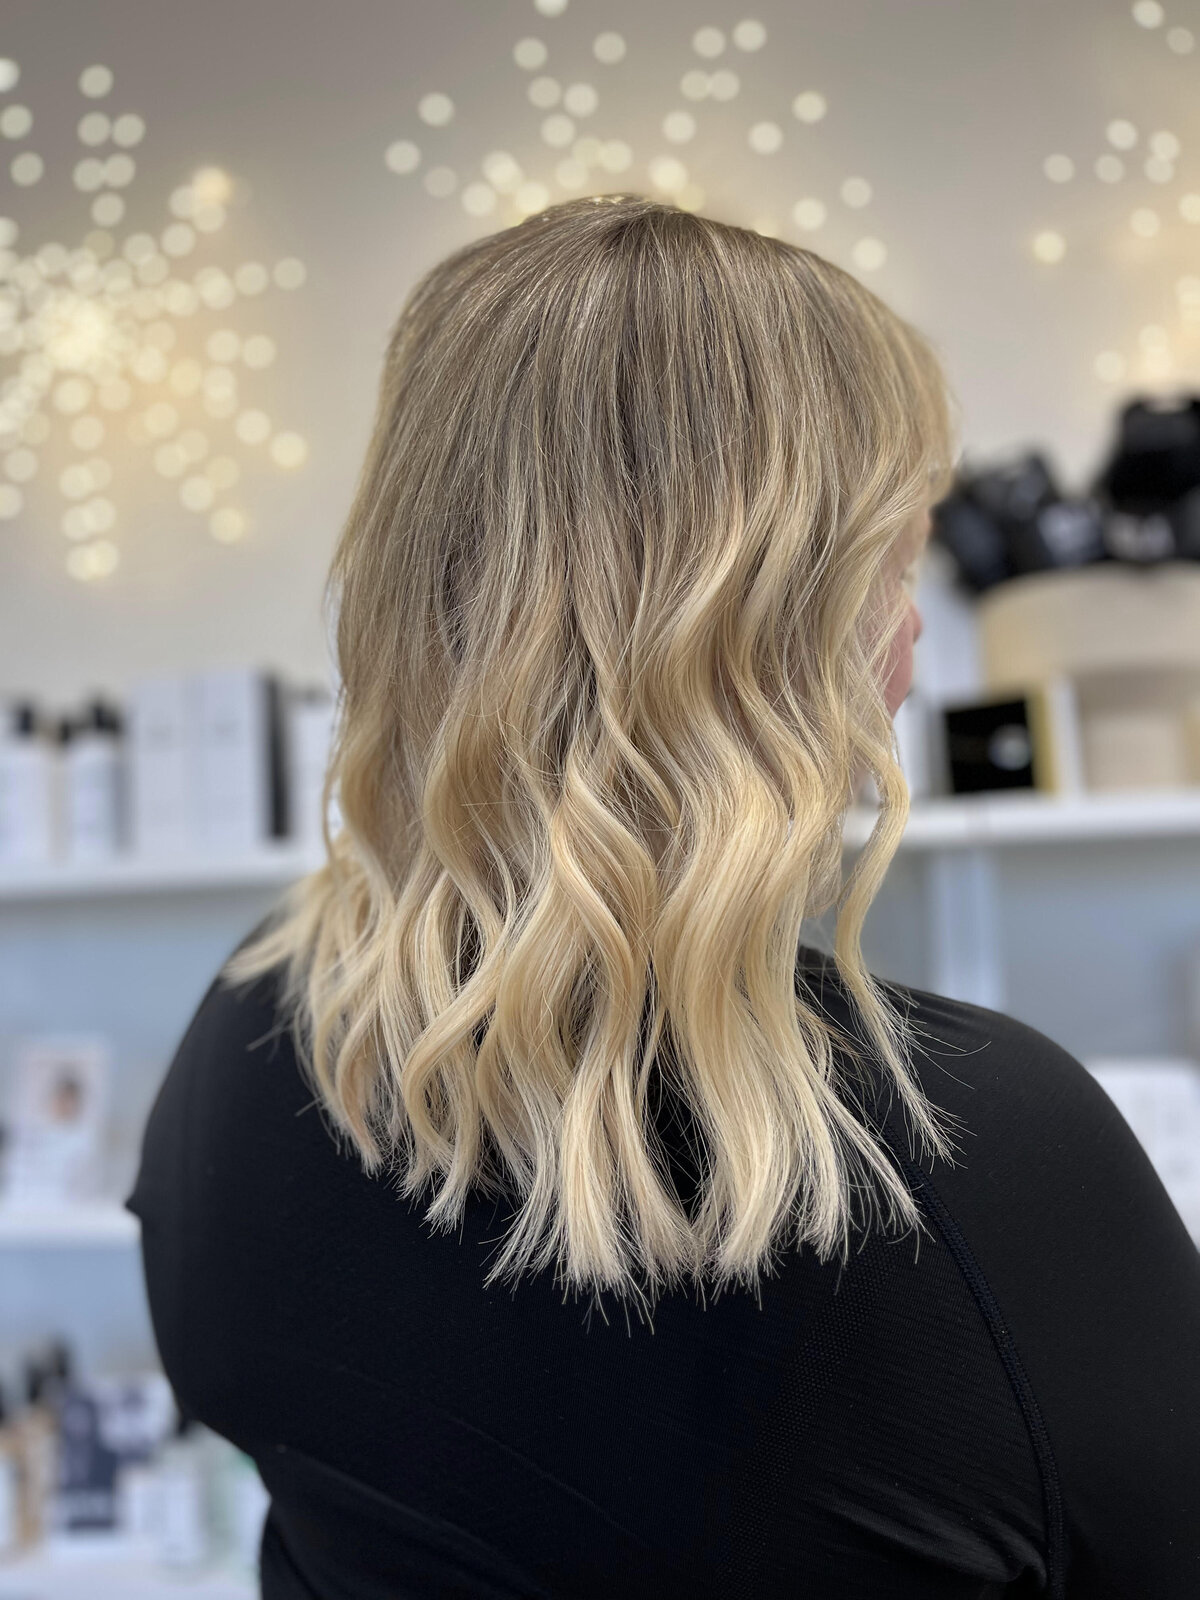 Unlock your blonde ombre beauty potential at Nova Strands Salon: Where elegance meets effortless style.